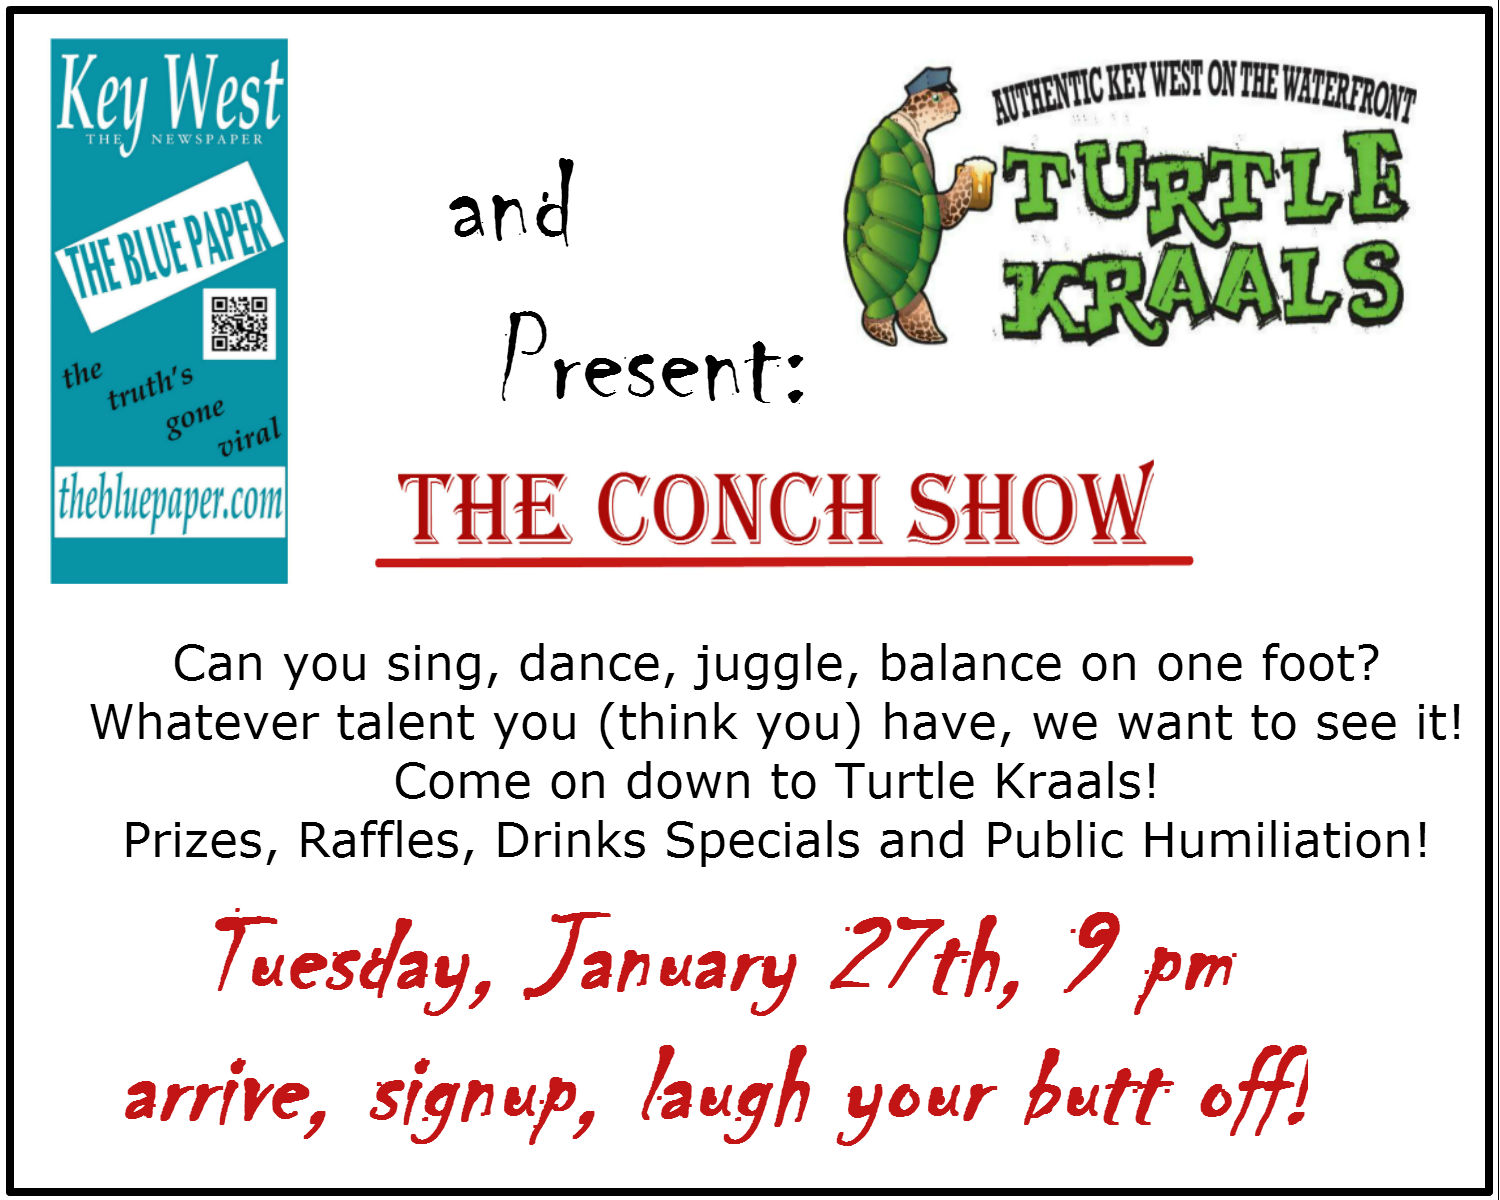 THE CONCH SHOW, JANUARY 27TH 9 PM